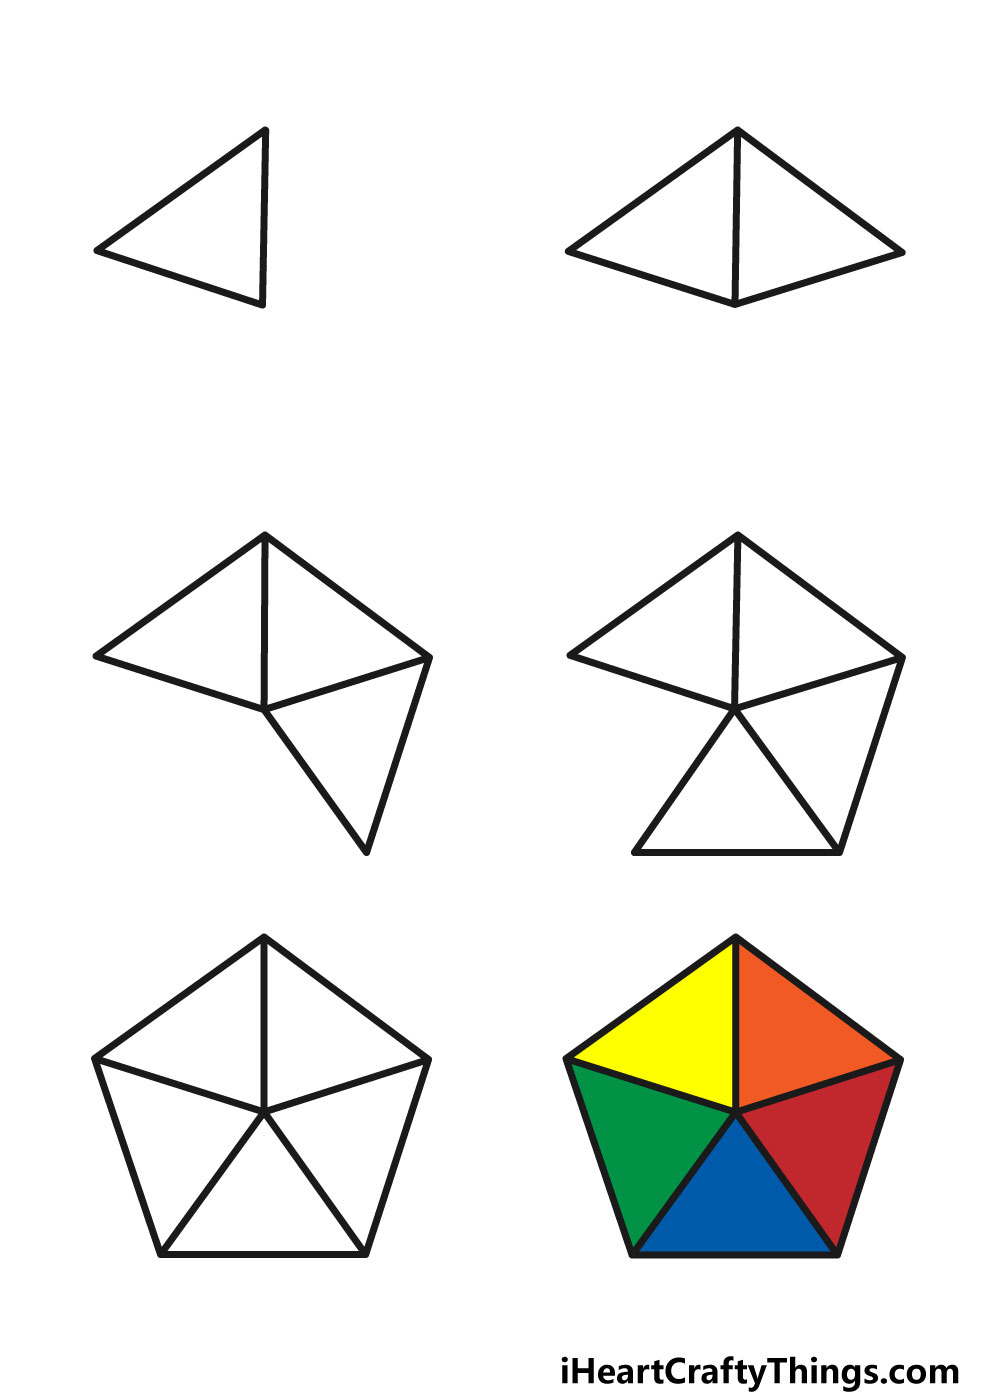 how to draw a pentagon in 6 steps